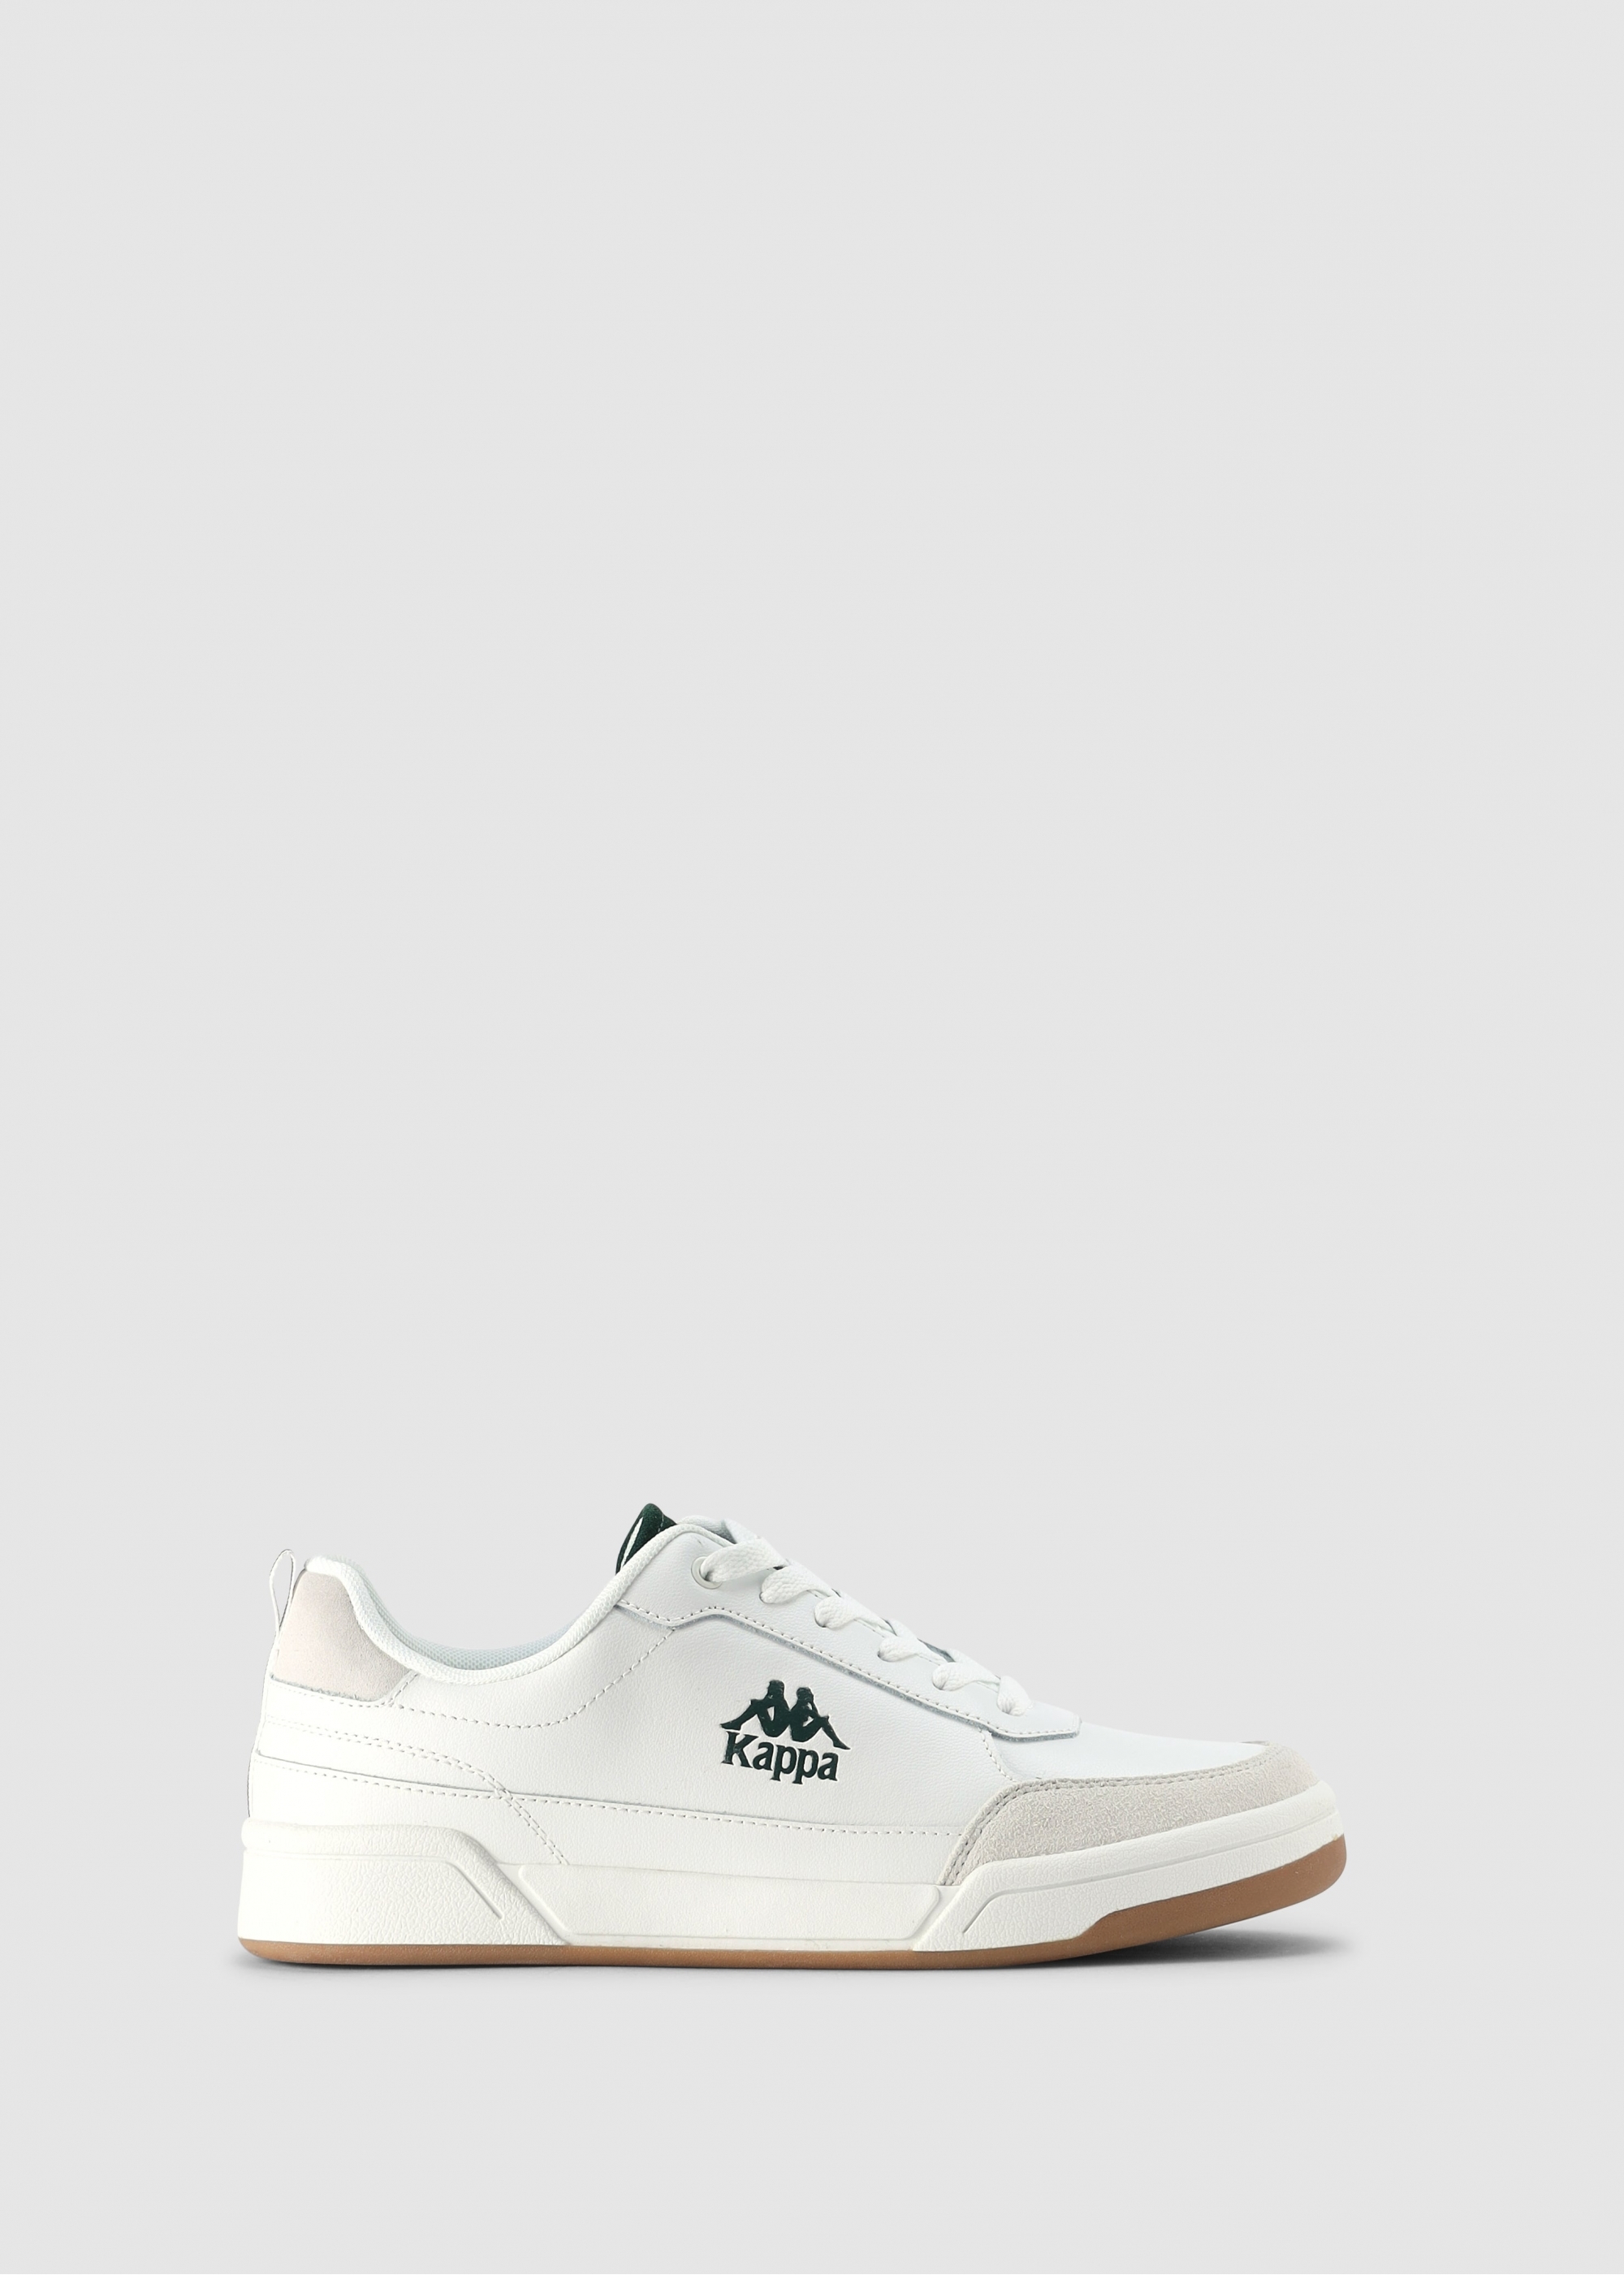 Kappa Mens Rocca Trainers In White-green